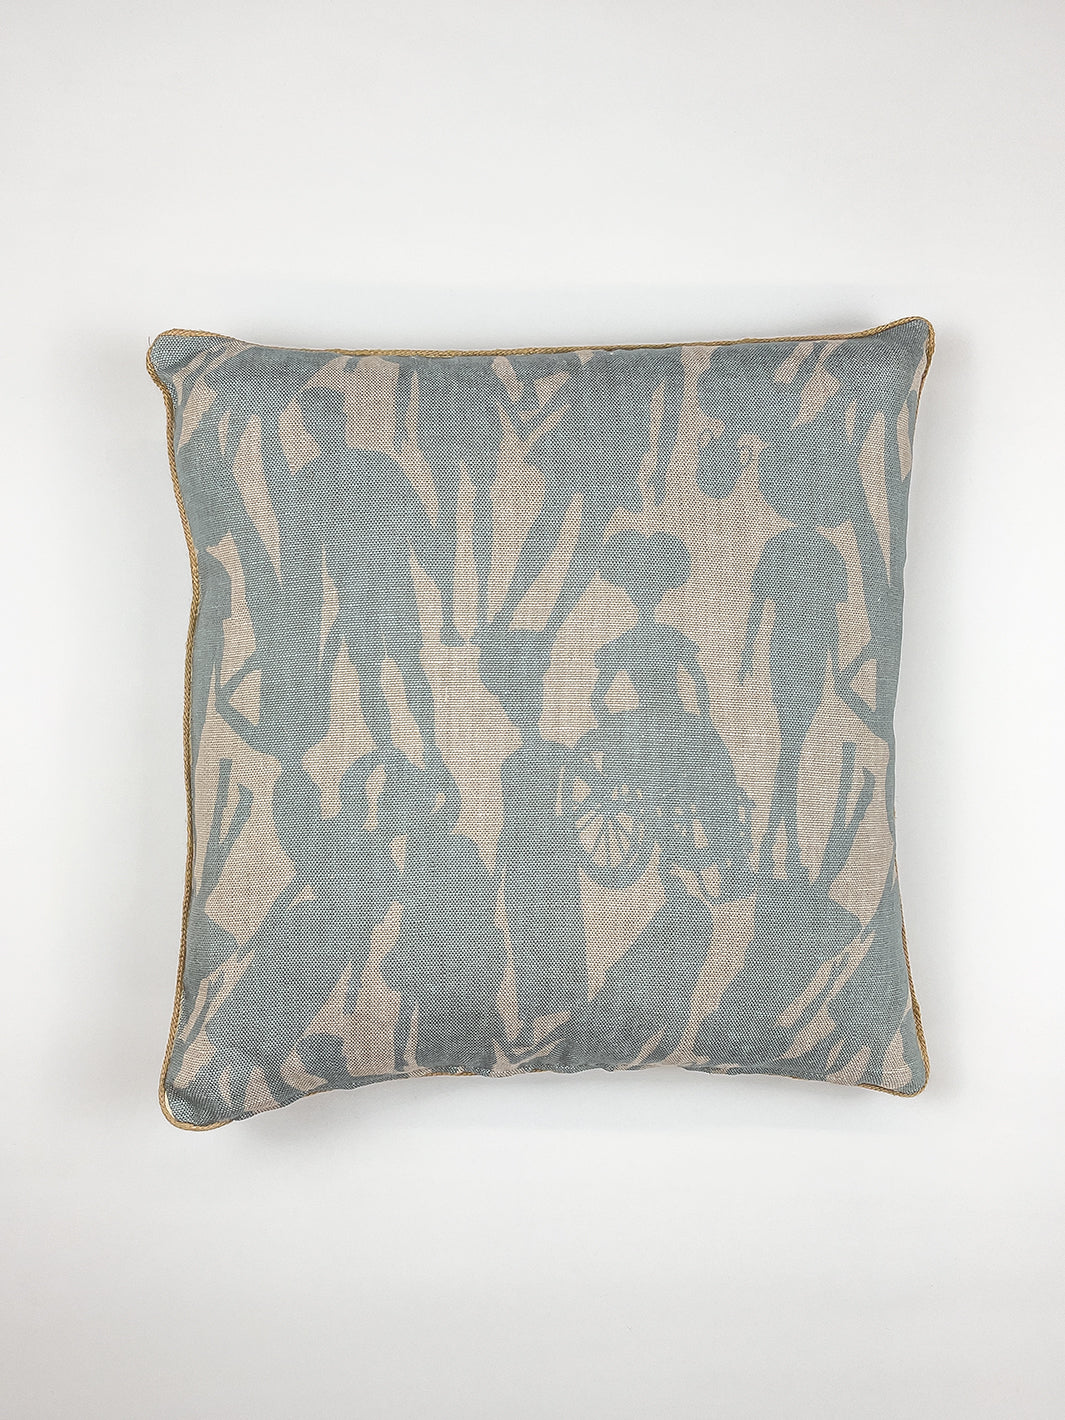 'Fashionista Silhouettes' Throw Pillow by Barbie™ - Blue on Flax Linen